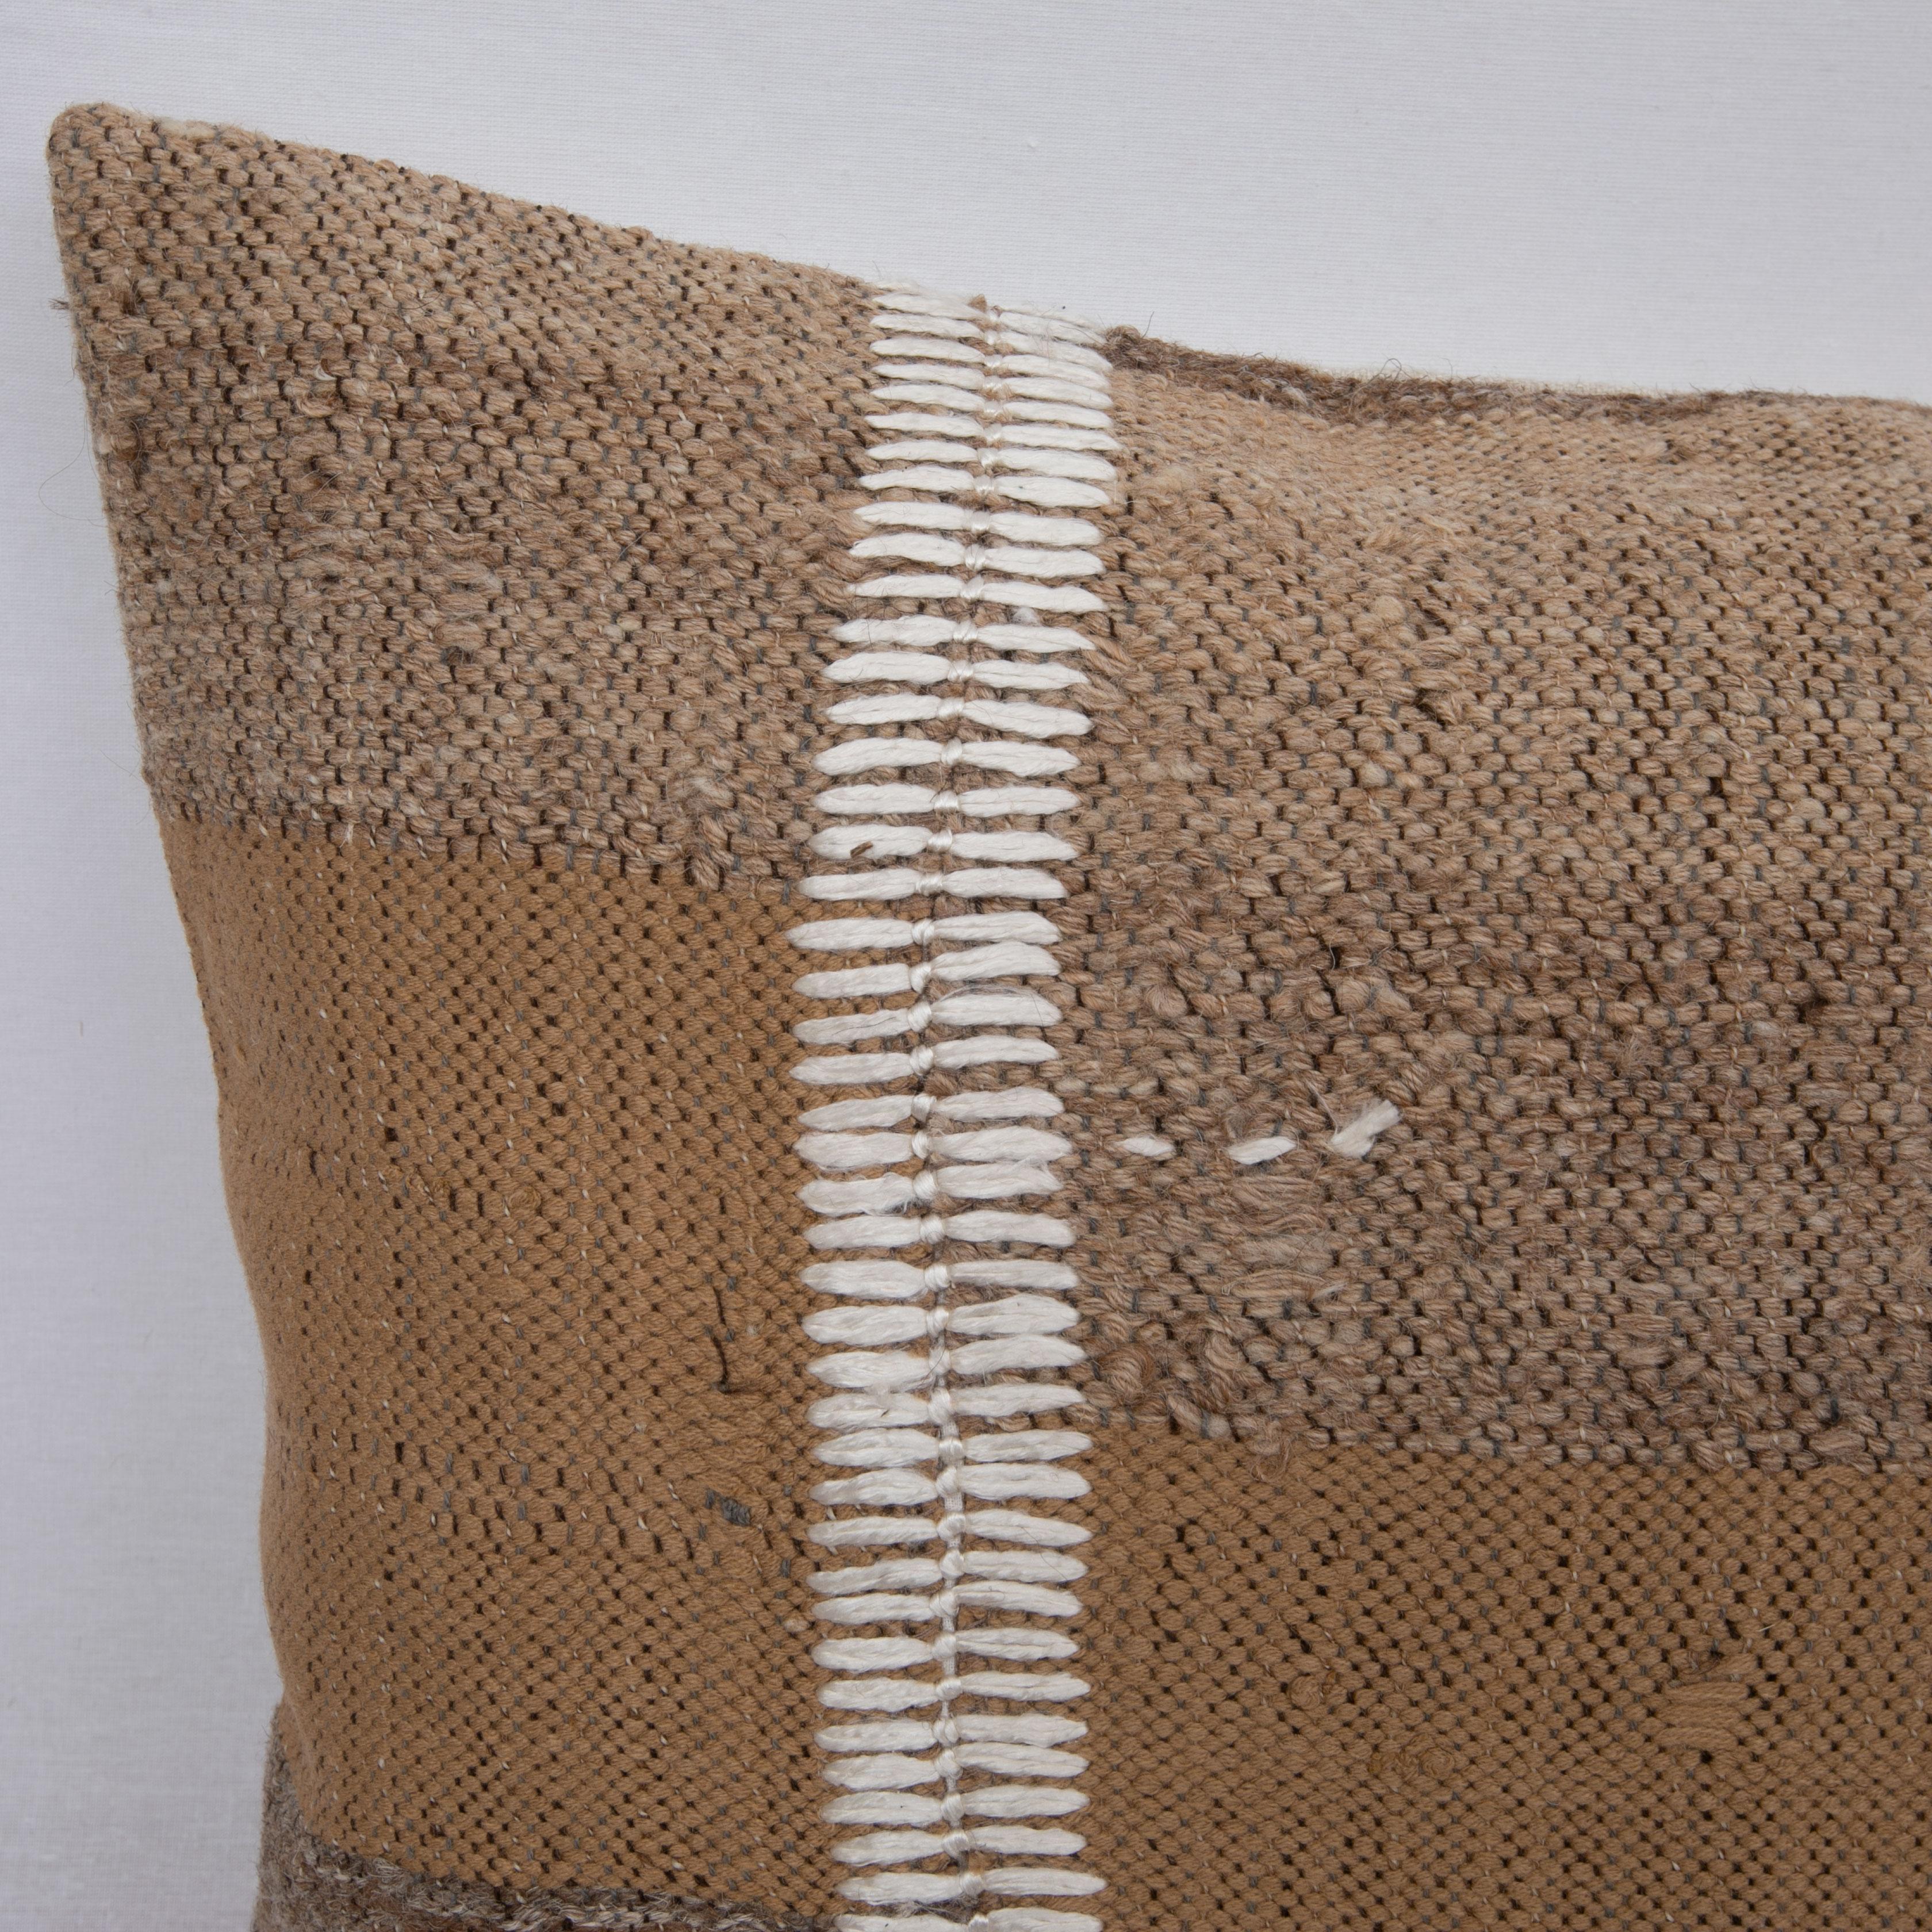 Turkish Rustic Pillow Case Made from a Vintage Un-Dyed Wool Coverlet, Mid 20th C. For Sale